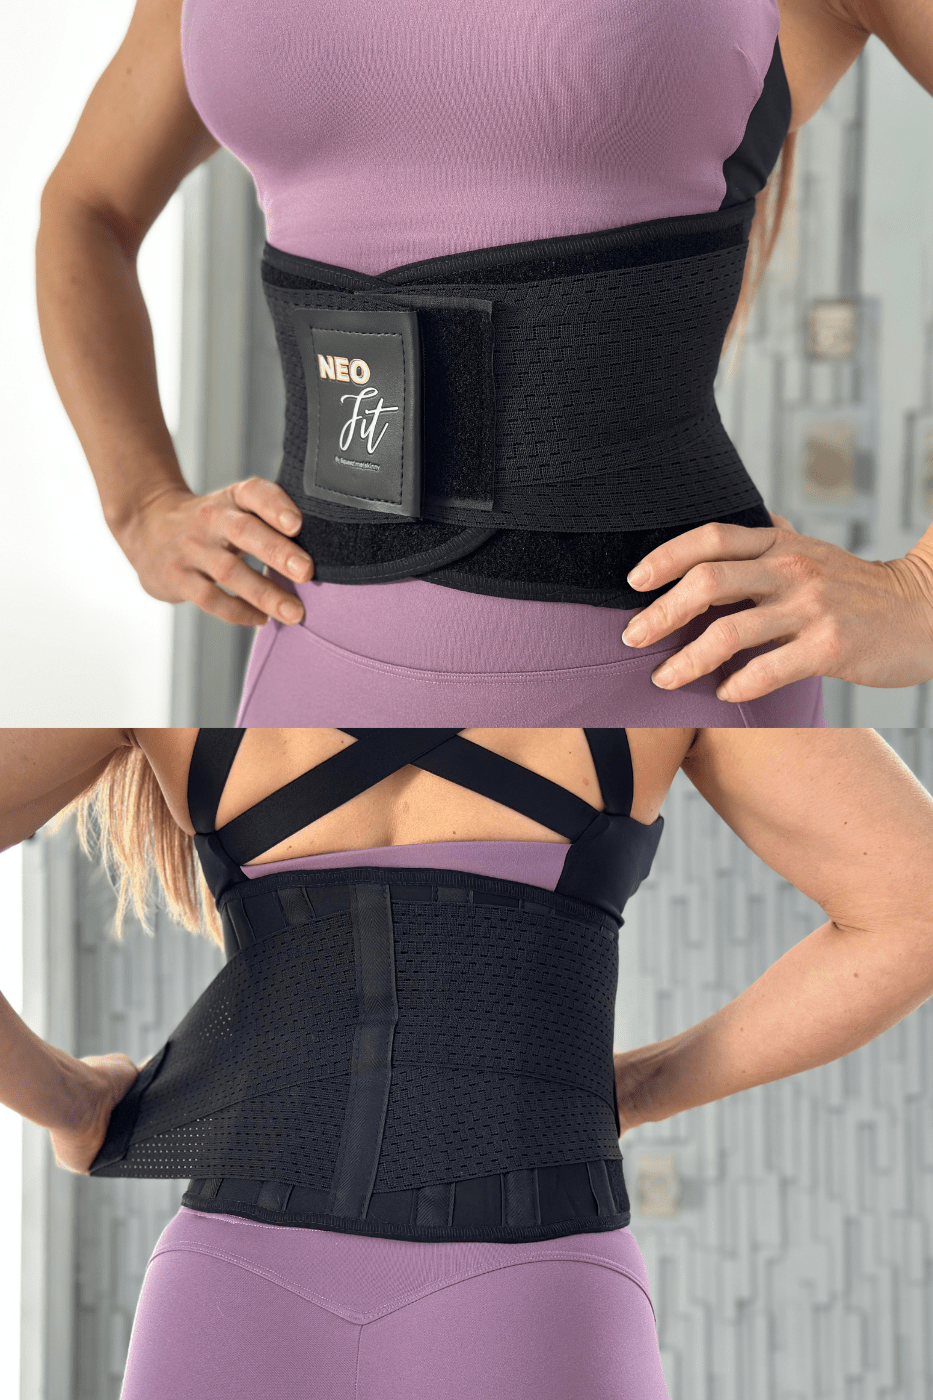 Neo Sweat Velcro Waist Trainer Belt With & Without Neoprene 